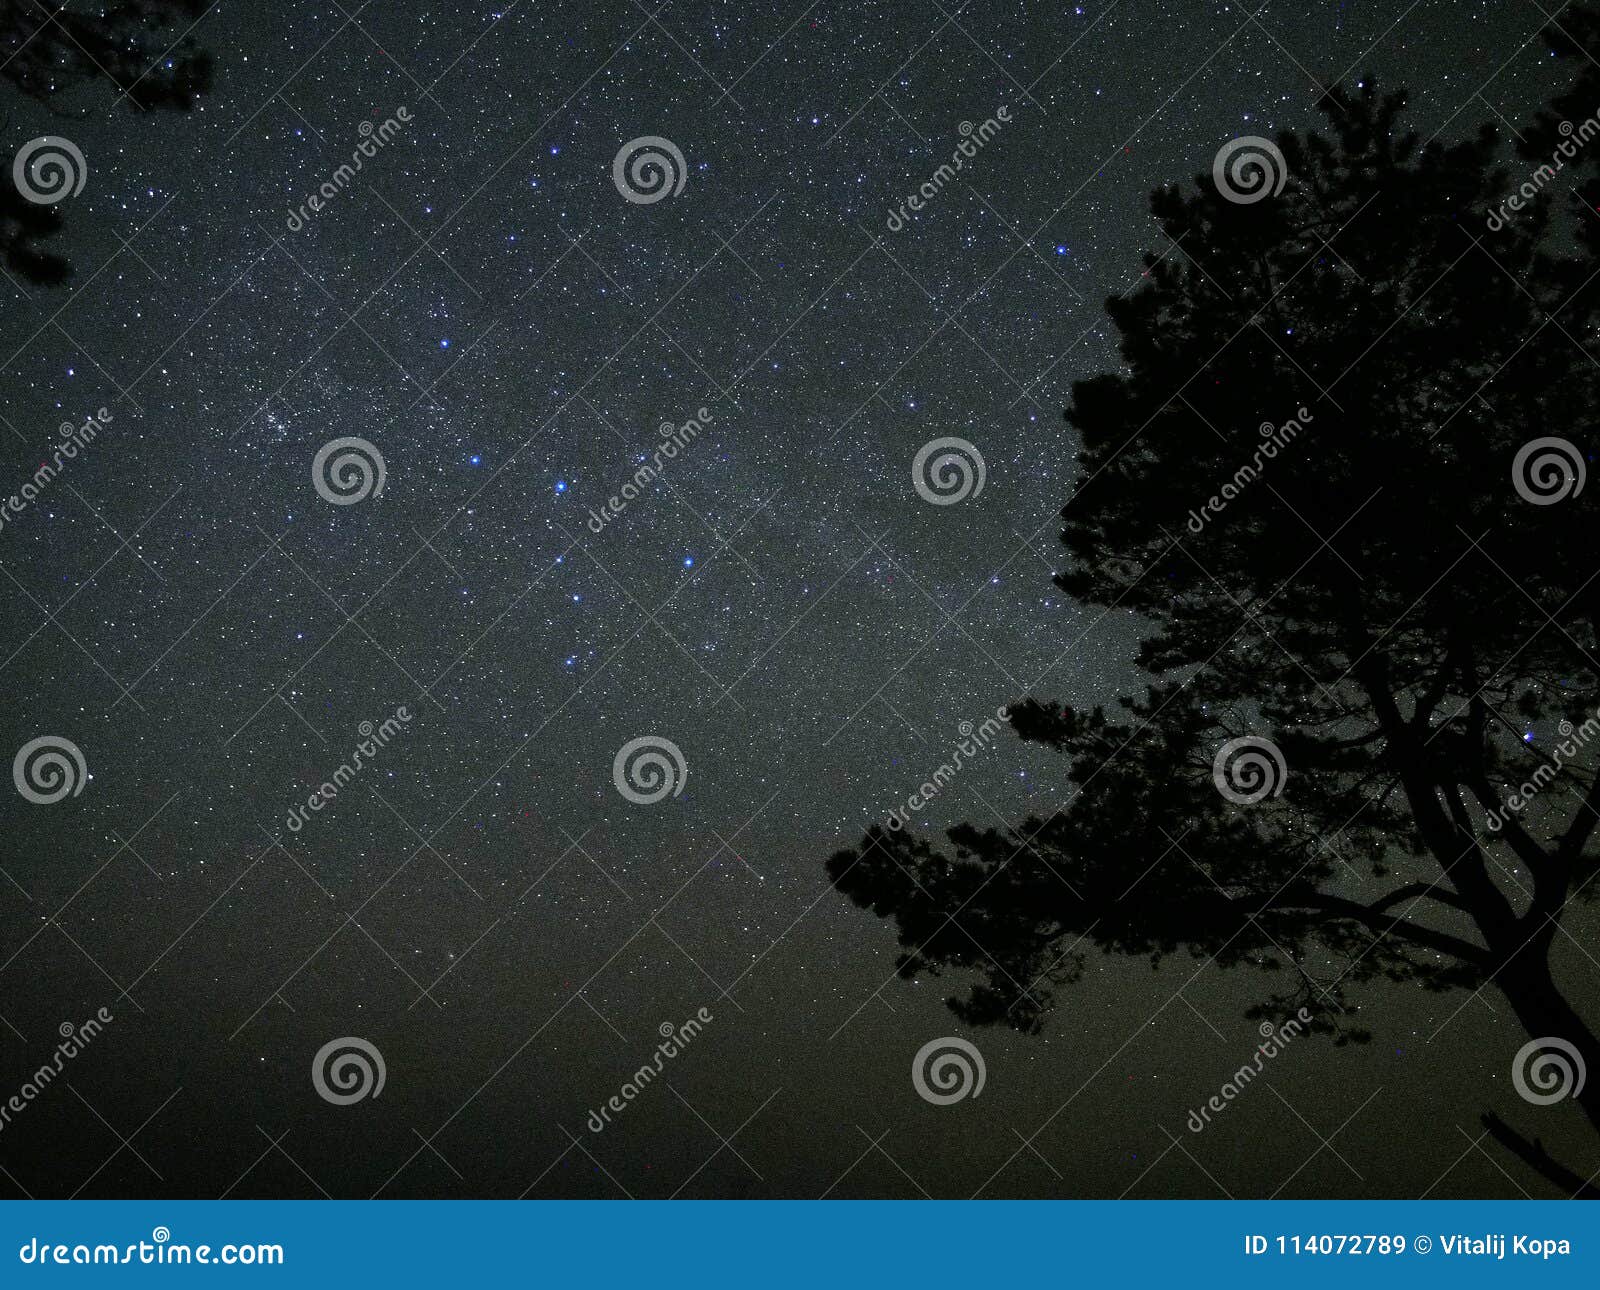 night sky stars perseus and cassiopeia constellation over forest